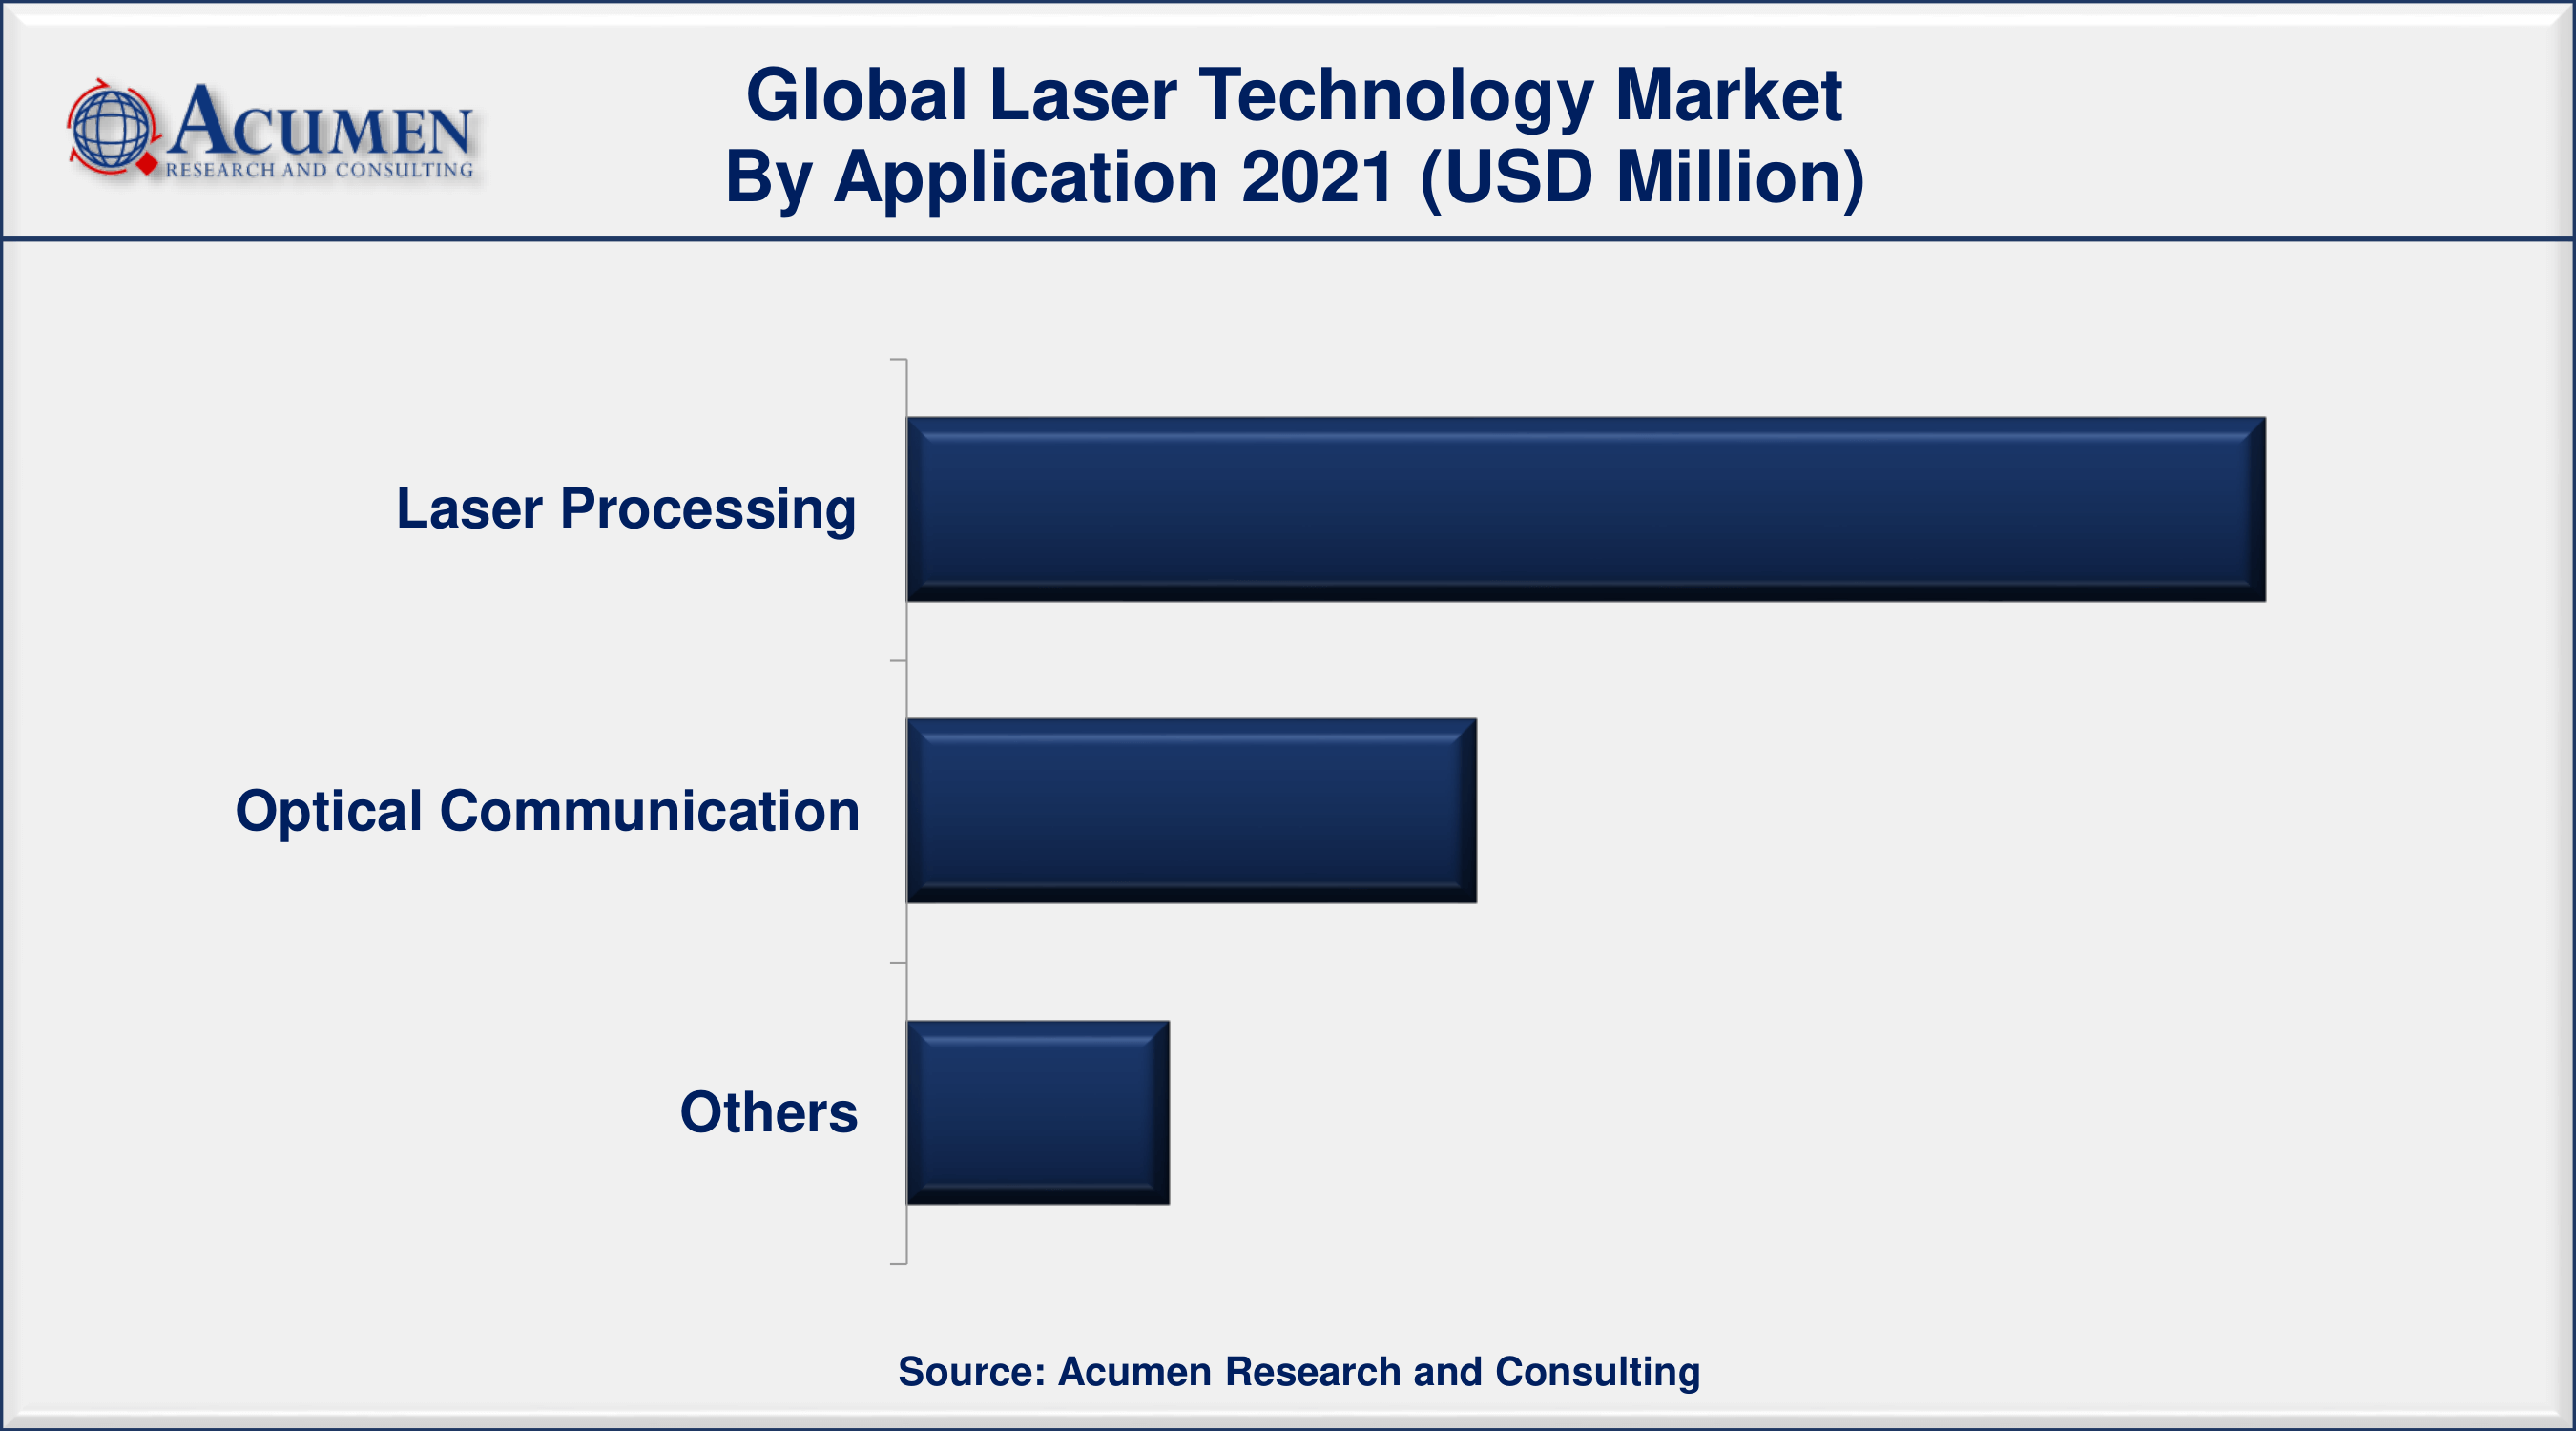 By application, the laser processing segment has accounted 60% market share in 2021